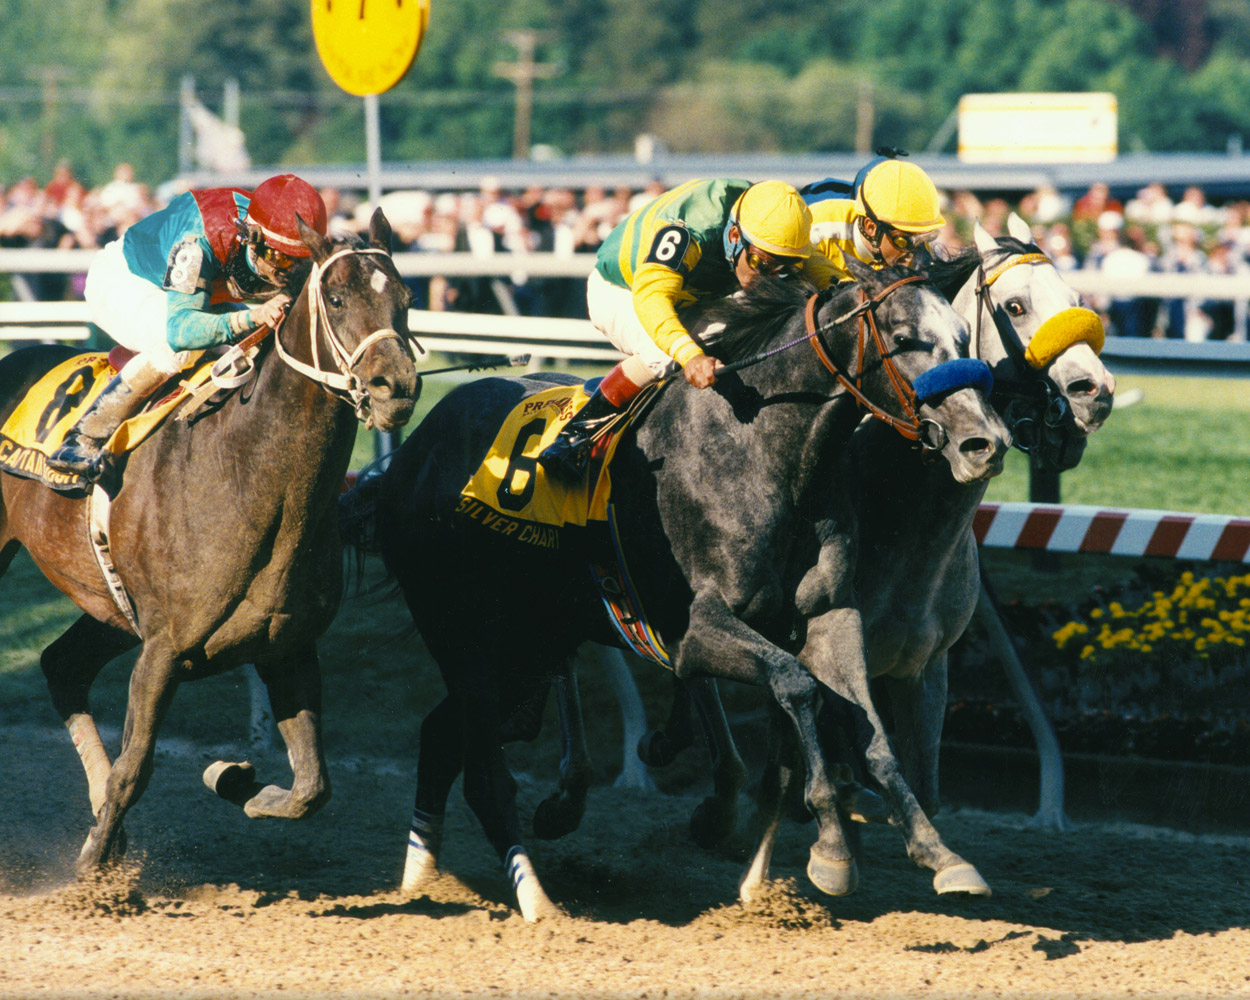 Silver Charm (Gary Stevens up) closing in to win the 1997 Preakness by a head (Skip Dickstein)